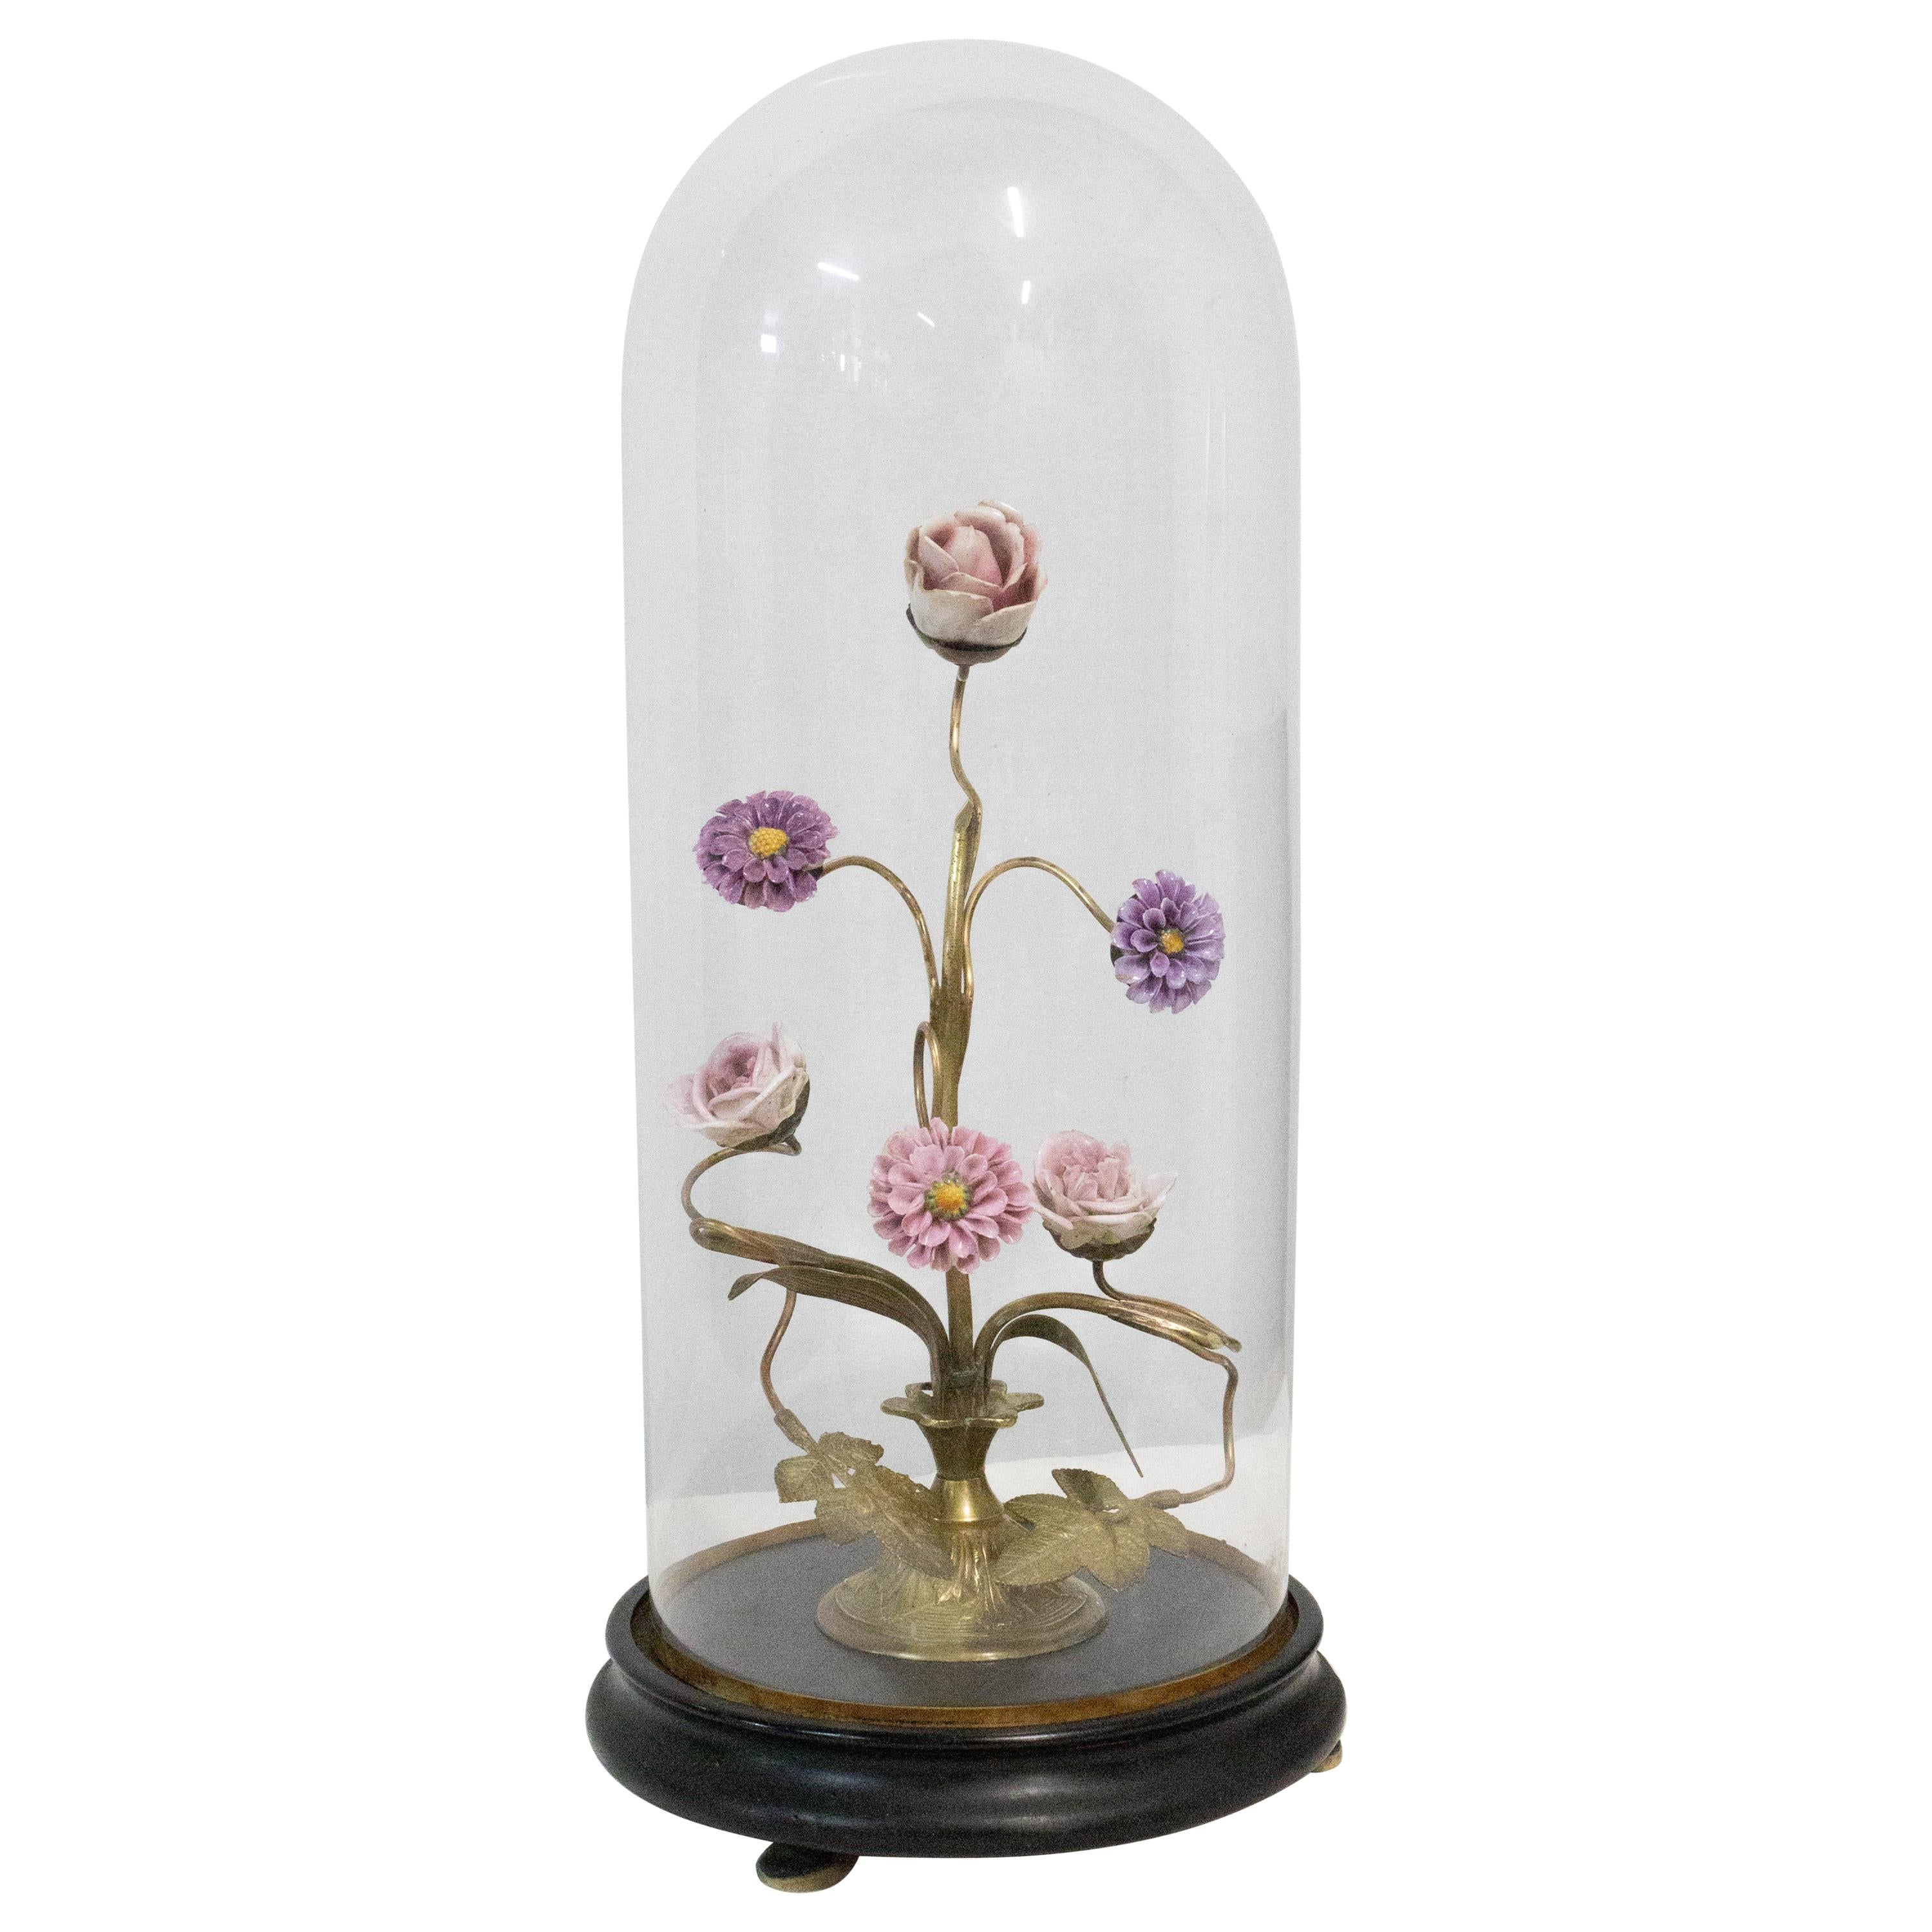 French Porcelain Flowers Globe Mariee Style under Glass Display Dome